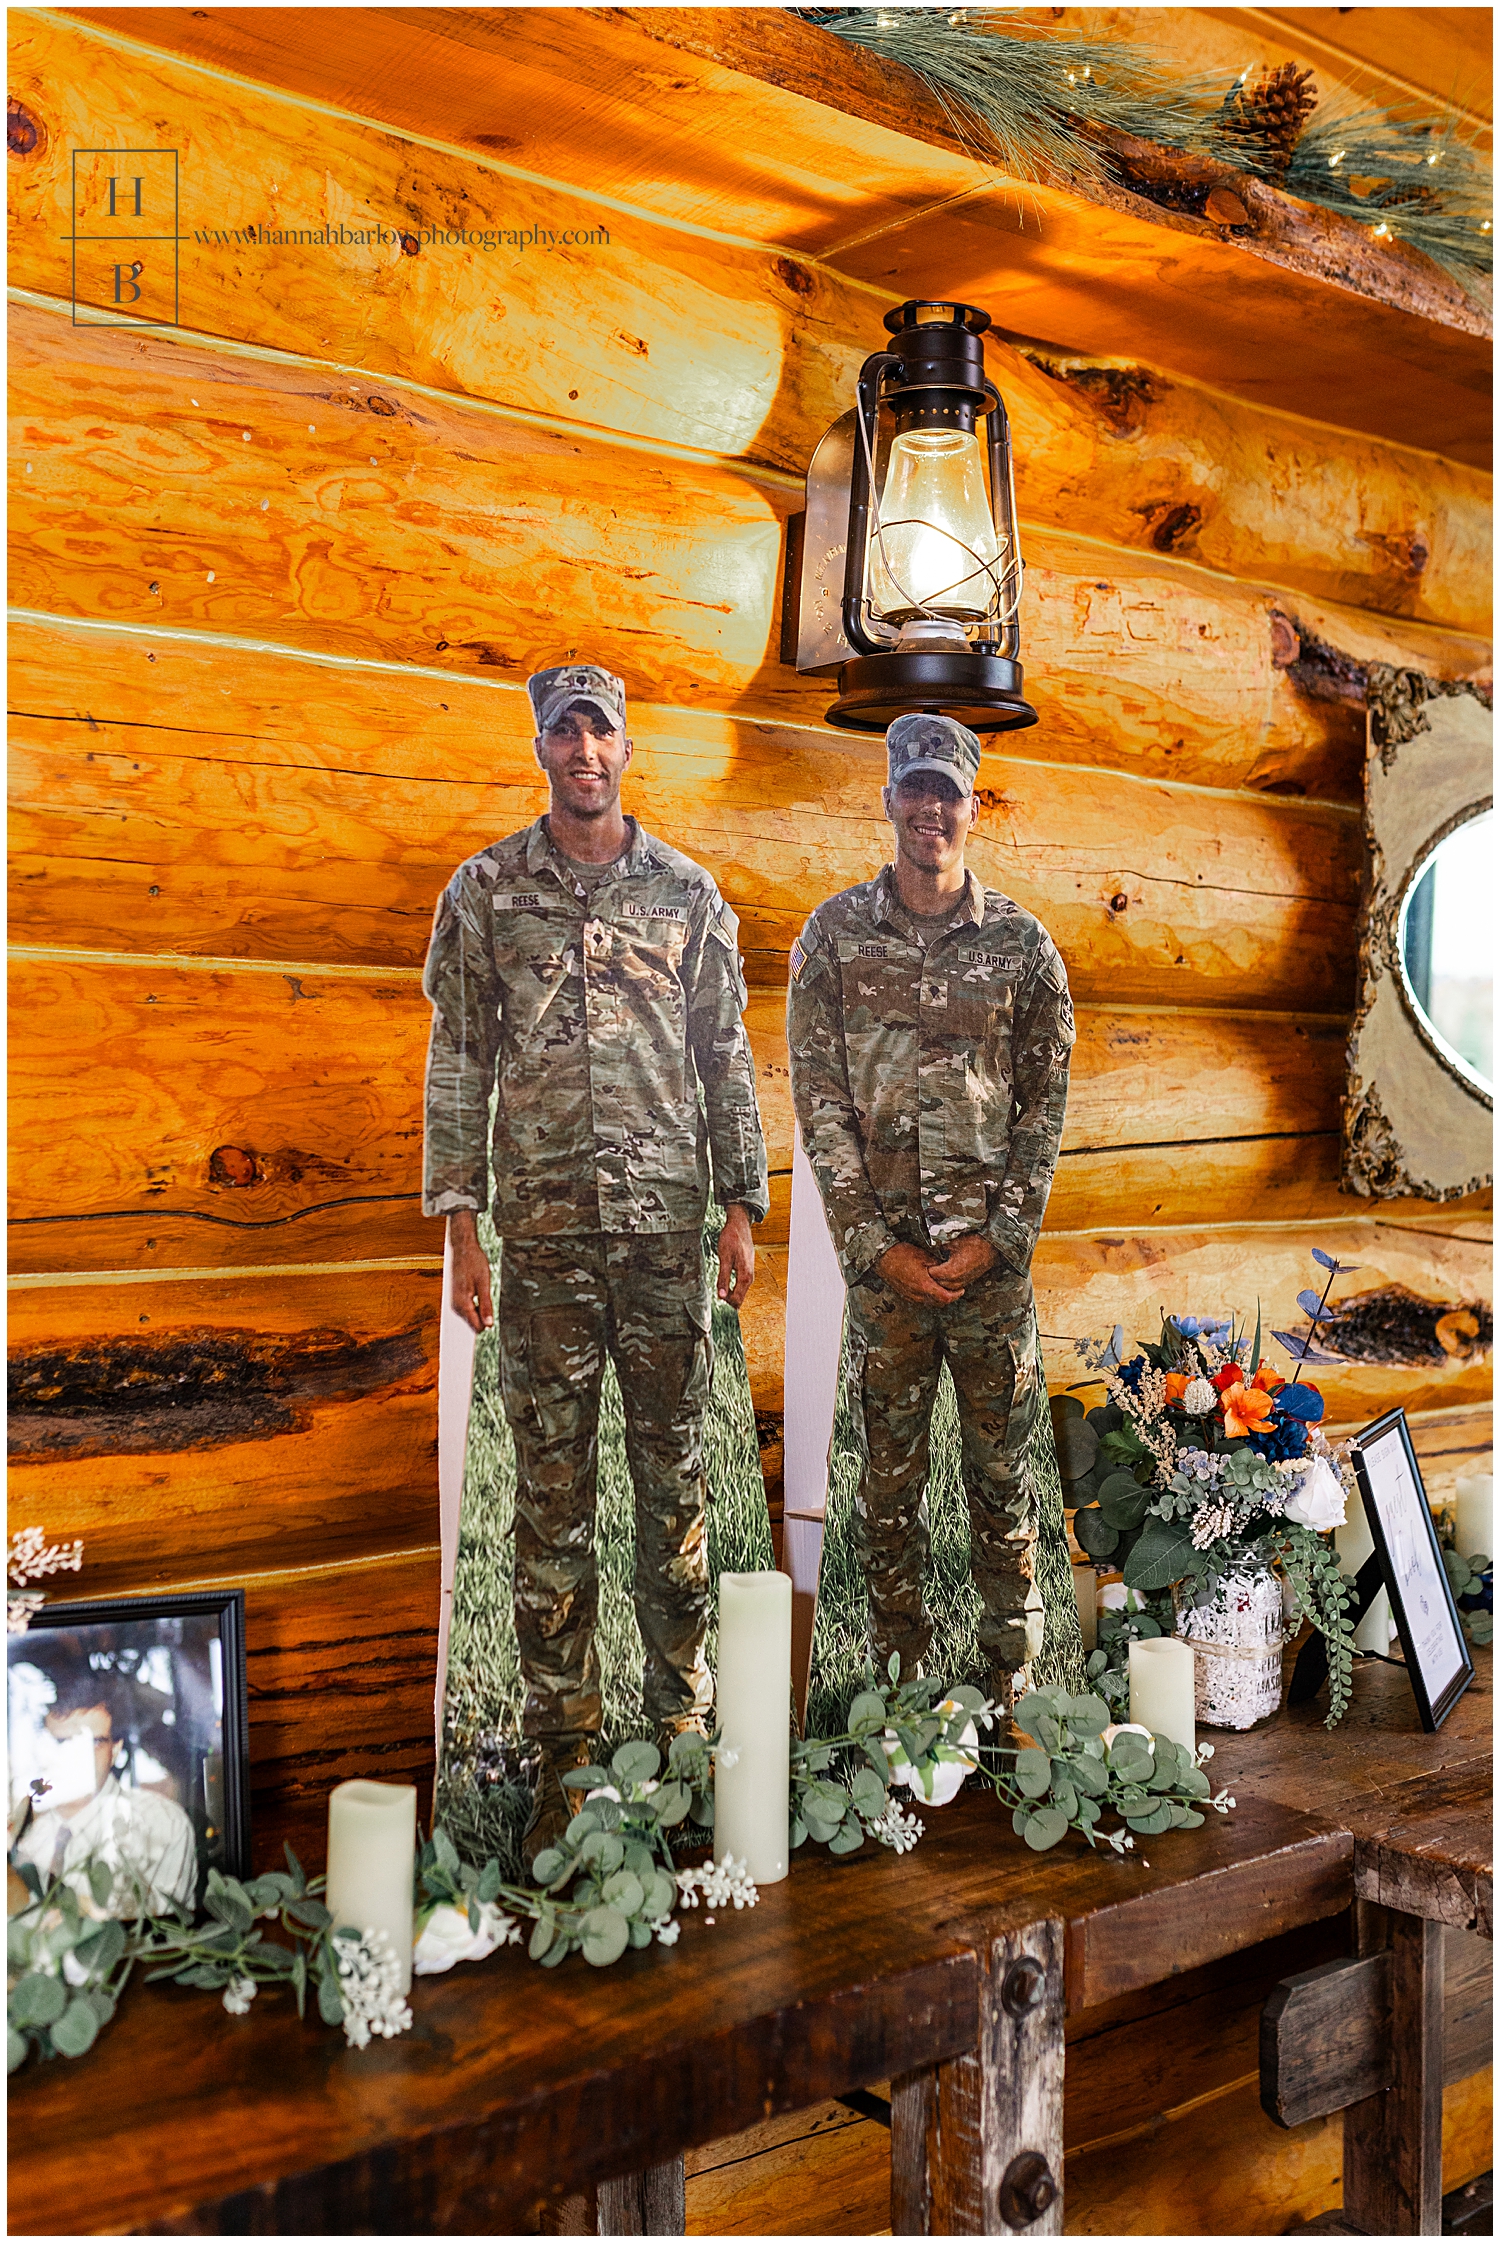 Cardboard cut outs of men in military uniform at wedding